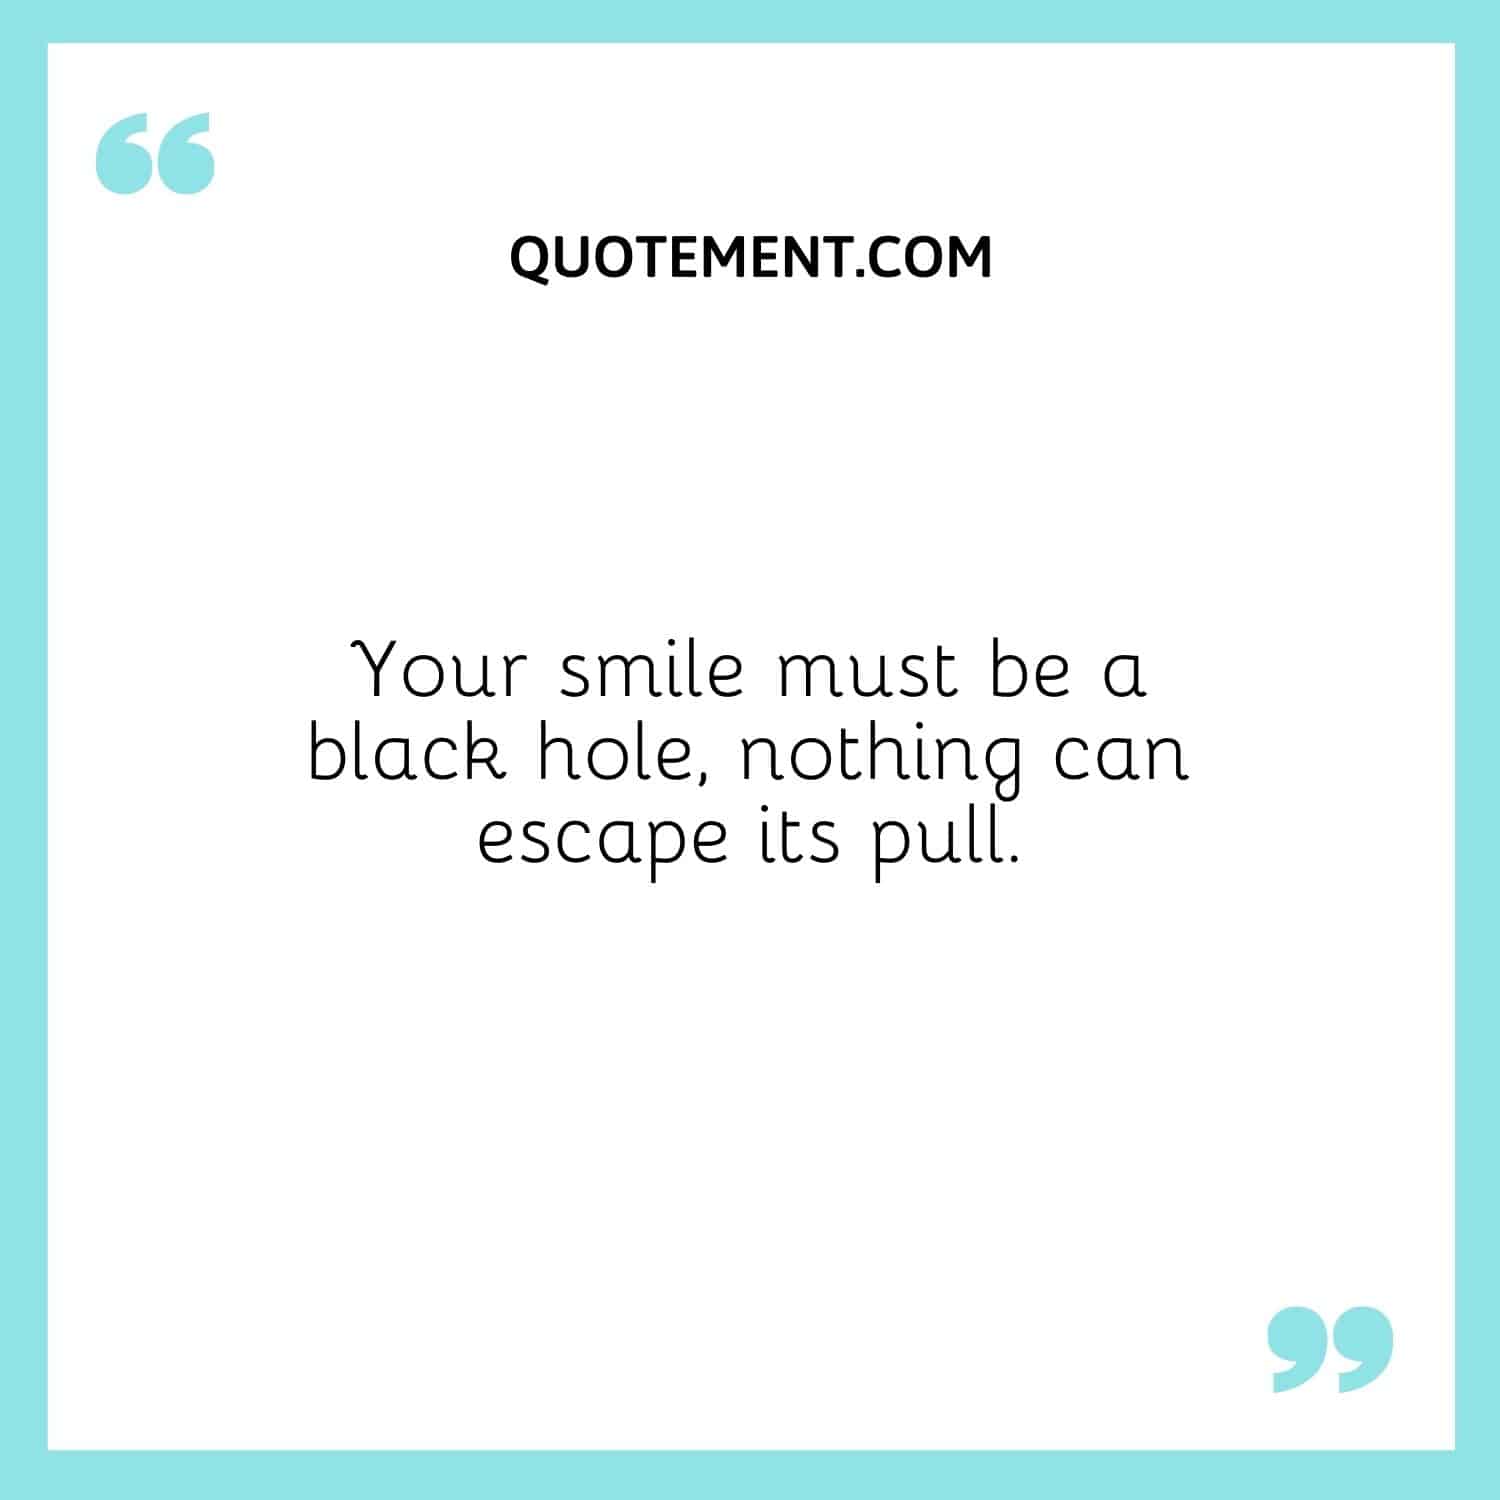 Your smile must be a black hole, nothing can escape its pull.